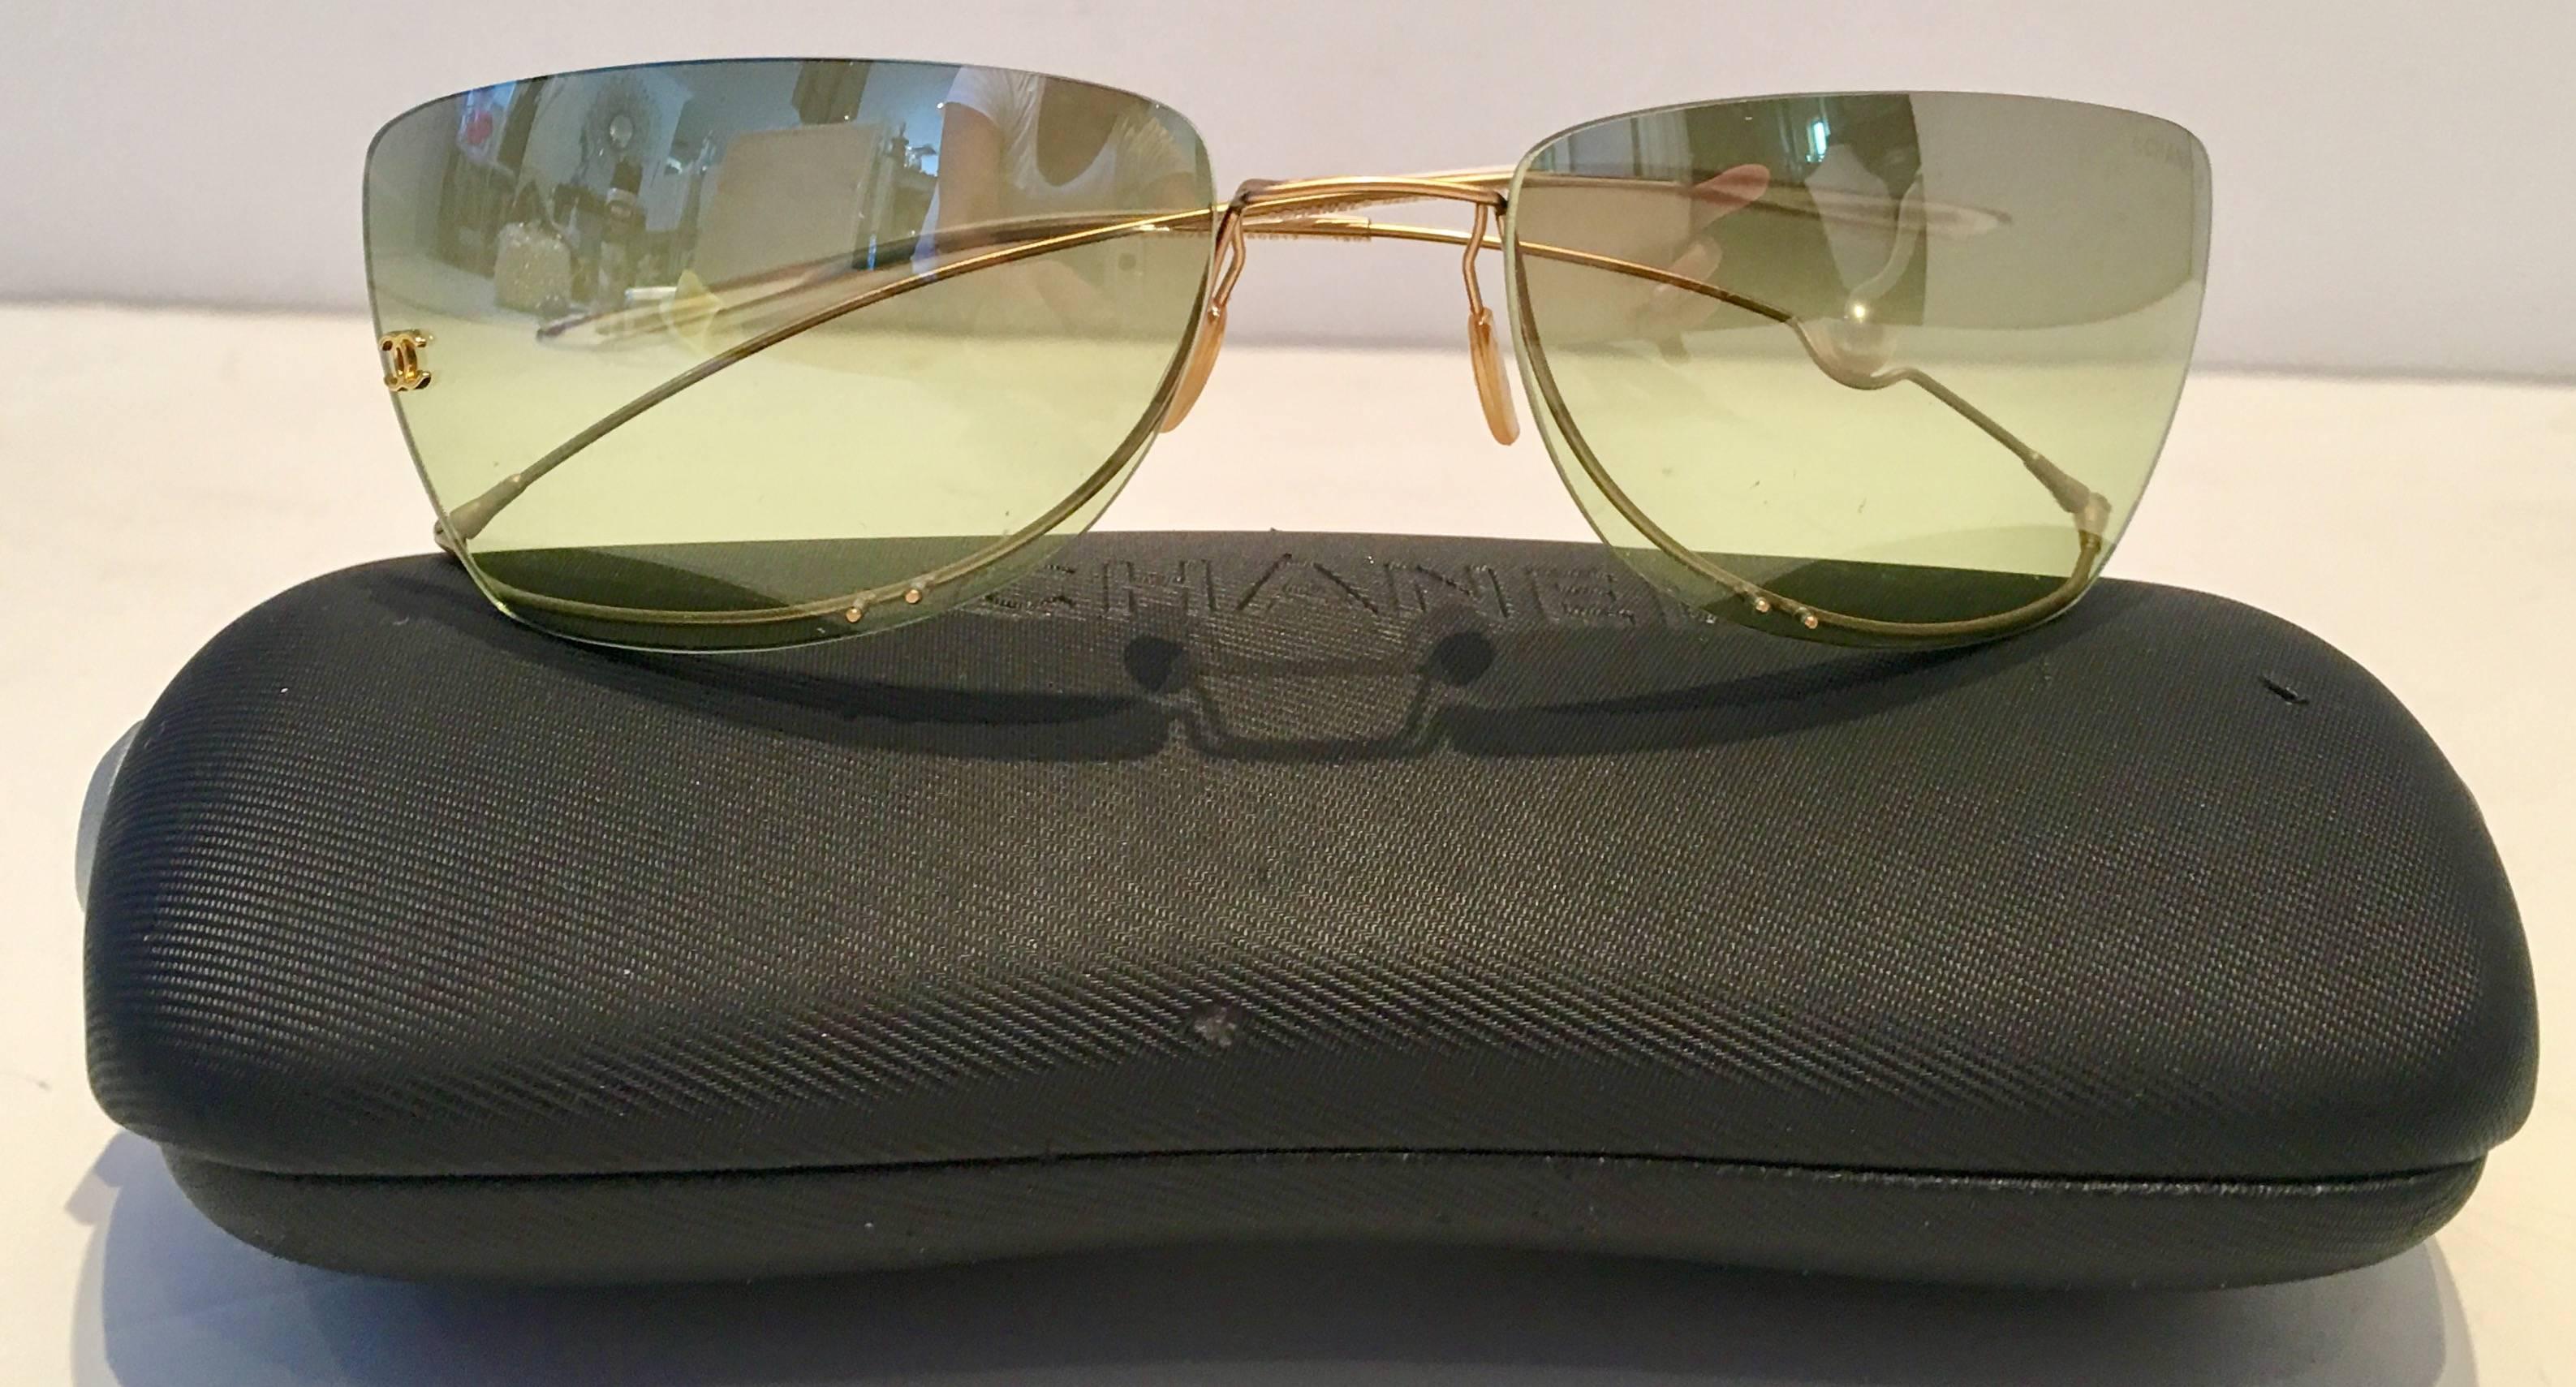 Vintage CHANEL Super lightweight limited edition rimless floating freshwater pearl gold plate wire and green mirrored lens sunglasses, 4053. These collector sunglasses feature a green mirrored lens with gold plate "CC" logo on each lens